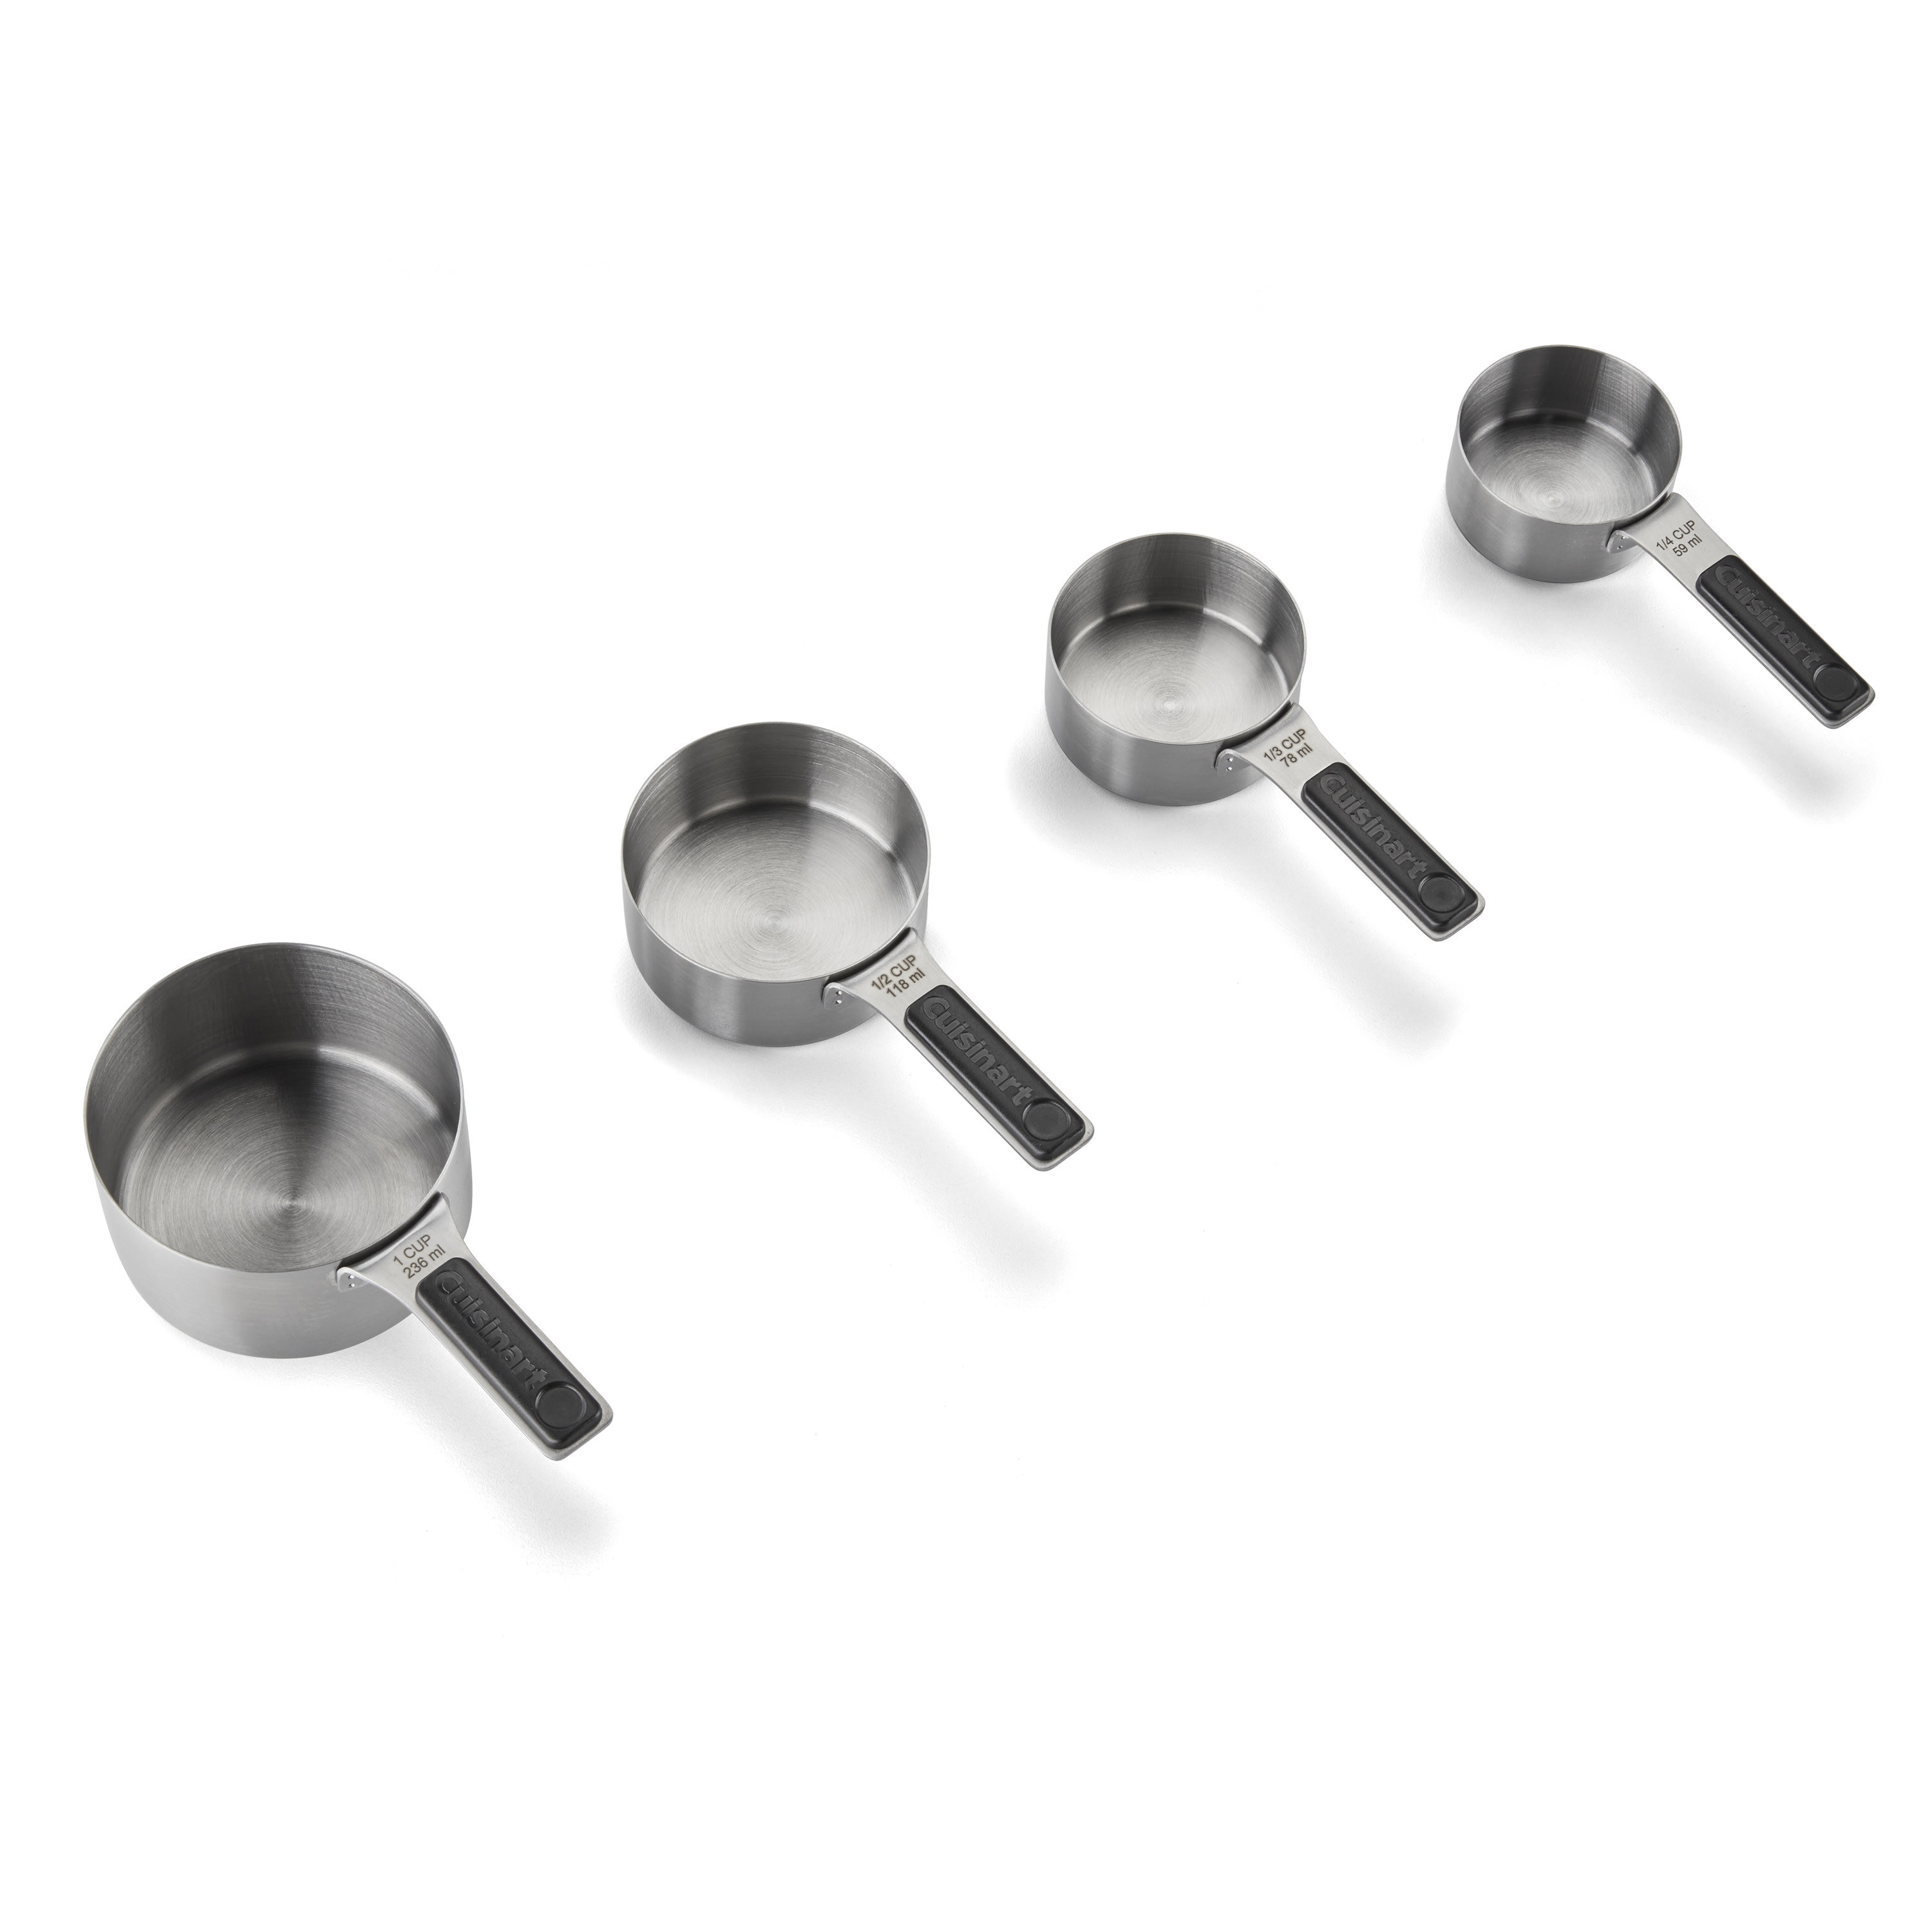 Cuisinart 6pc Stainless Steel/nylon Essential Tools And Gadgets